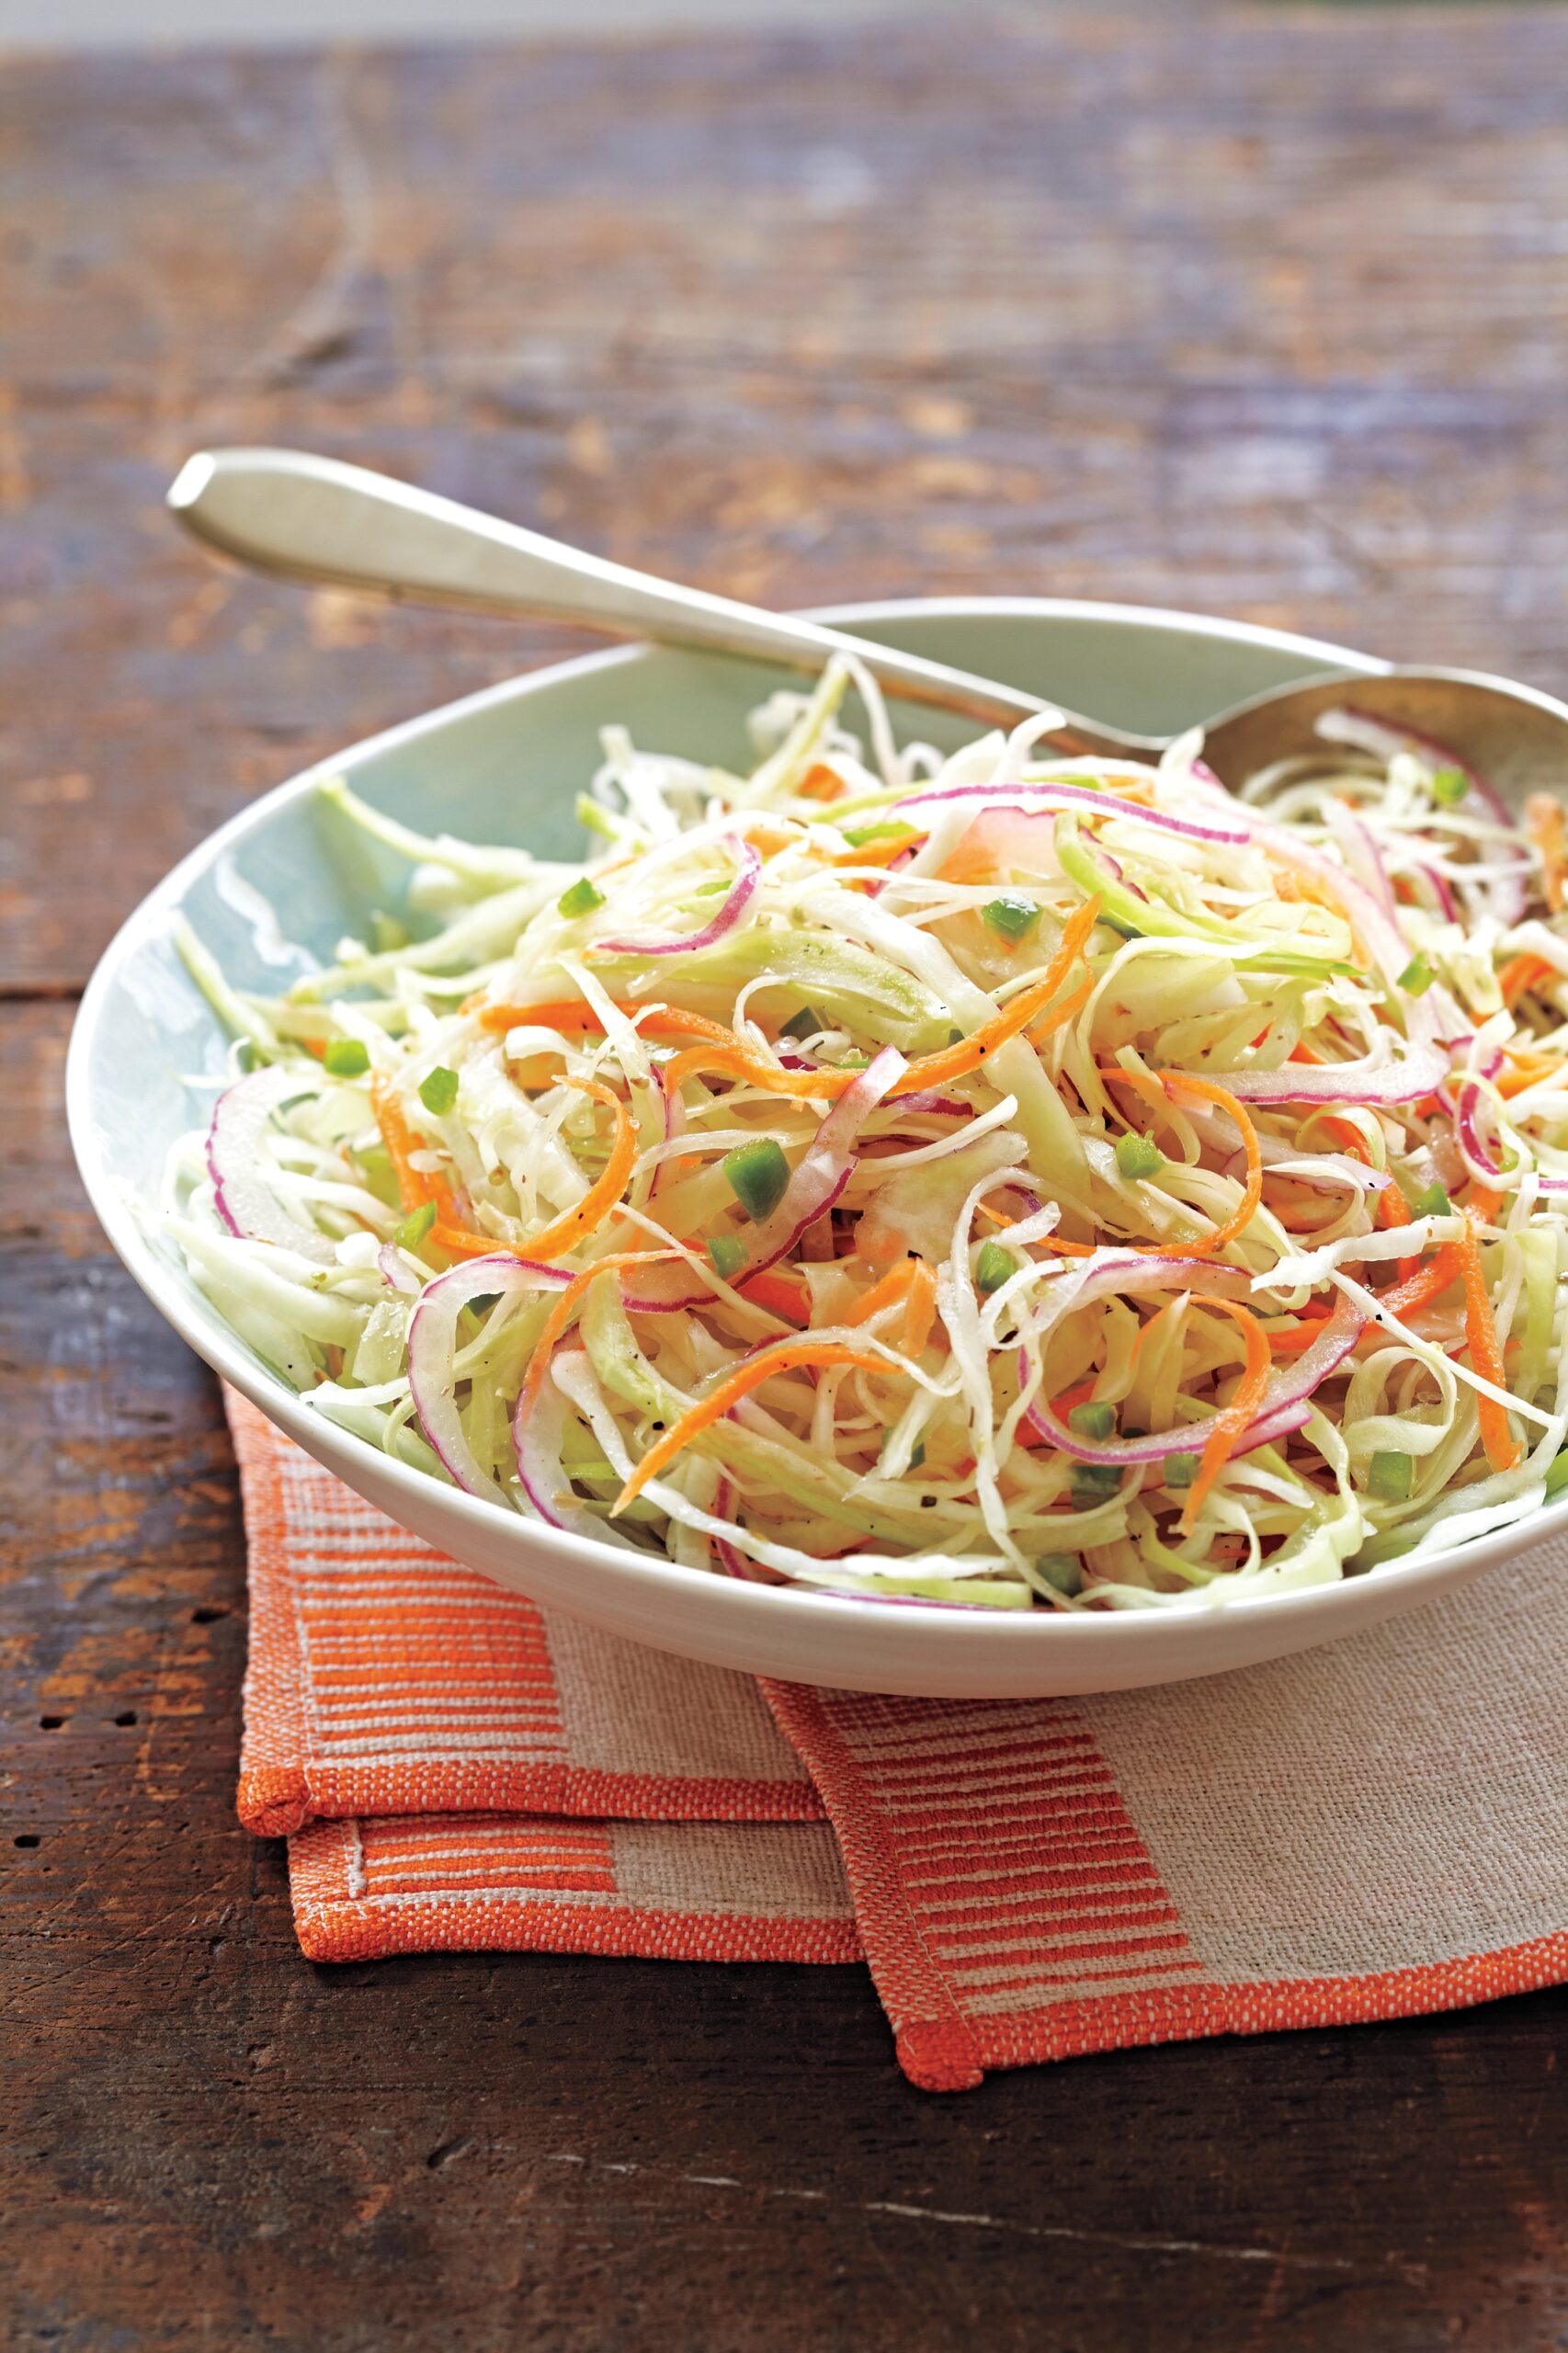 Tangy Hot Cabbage Slaw